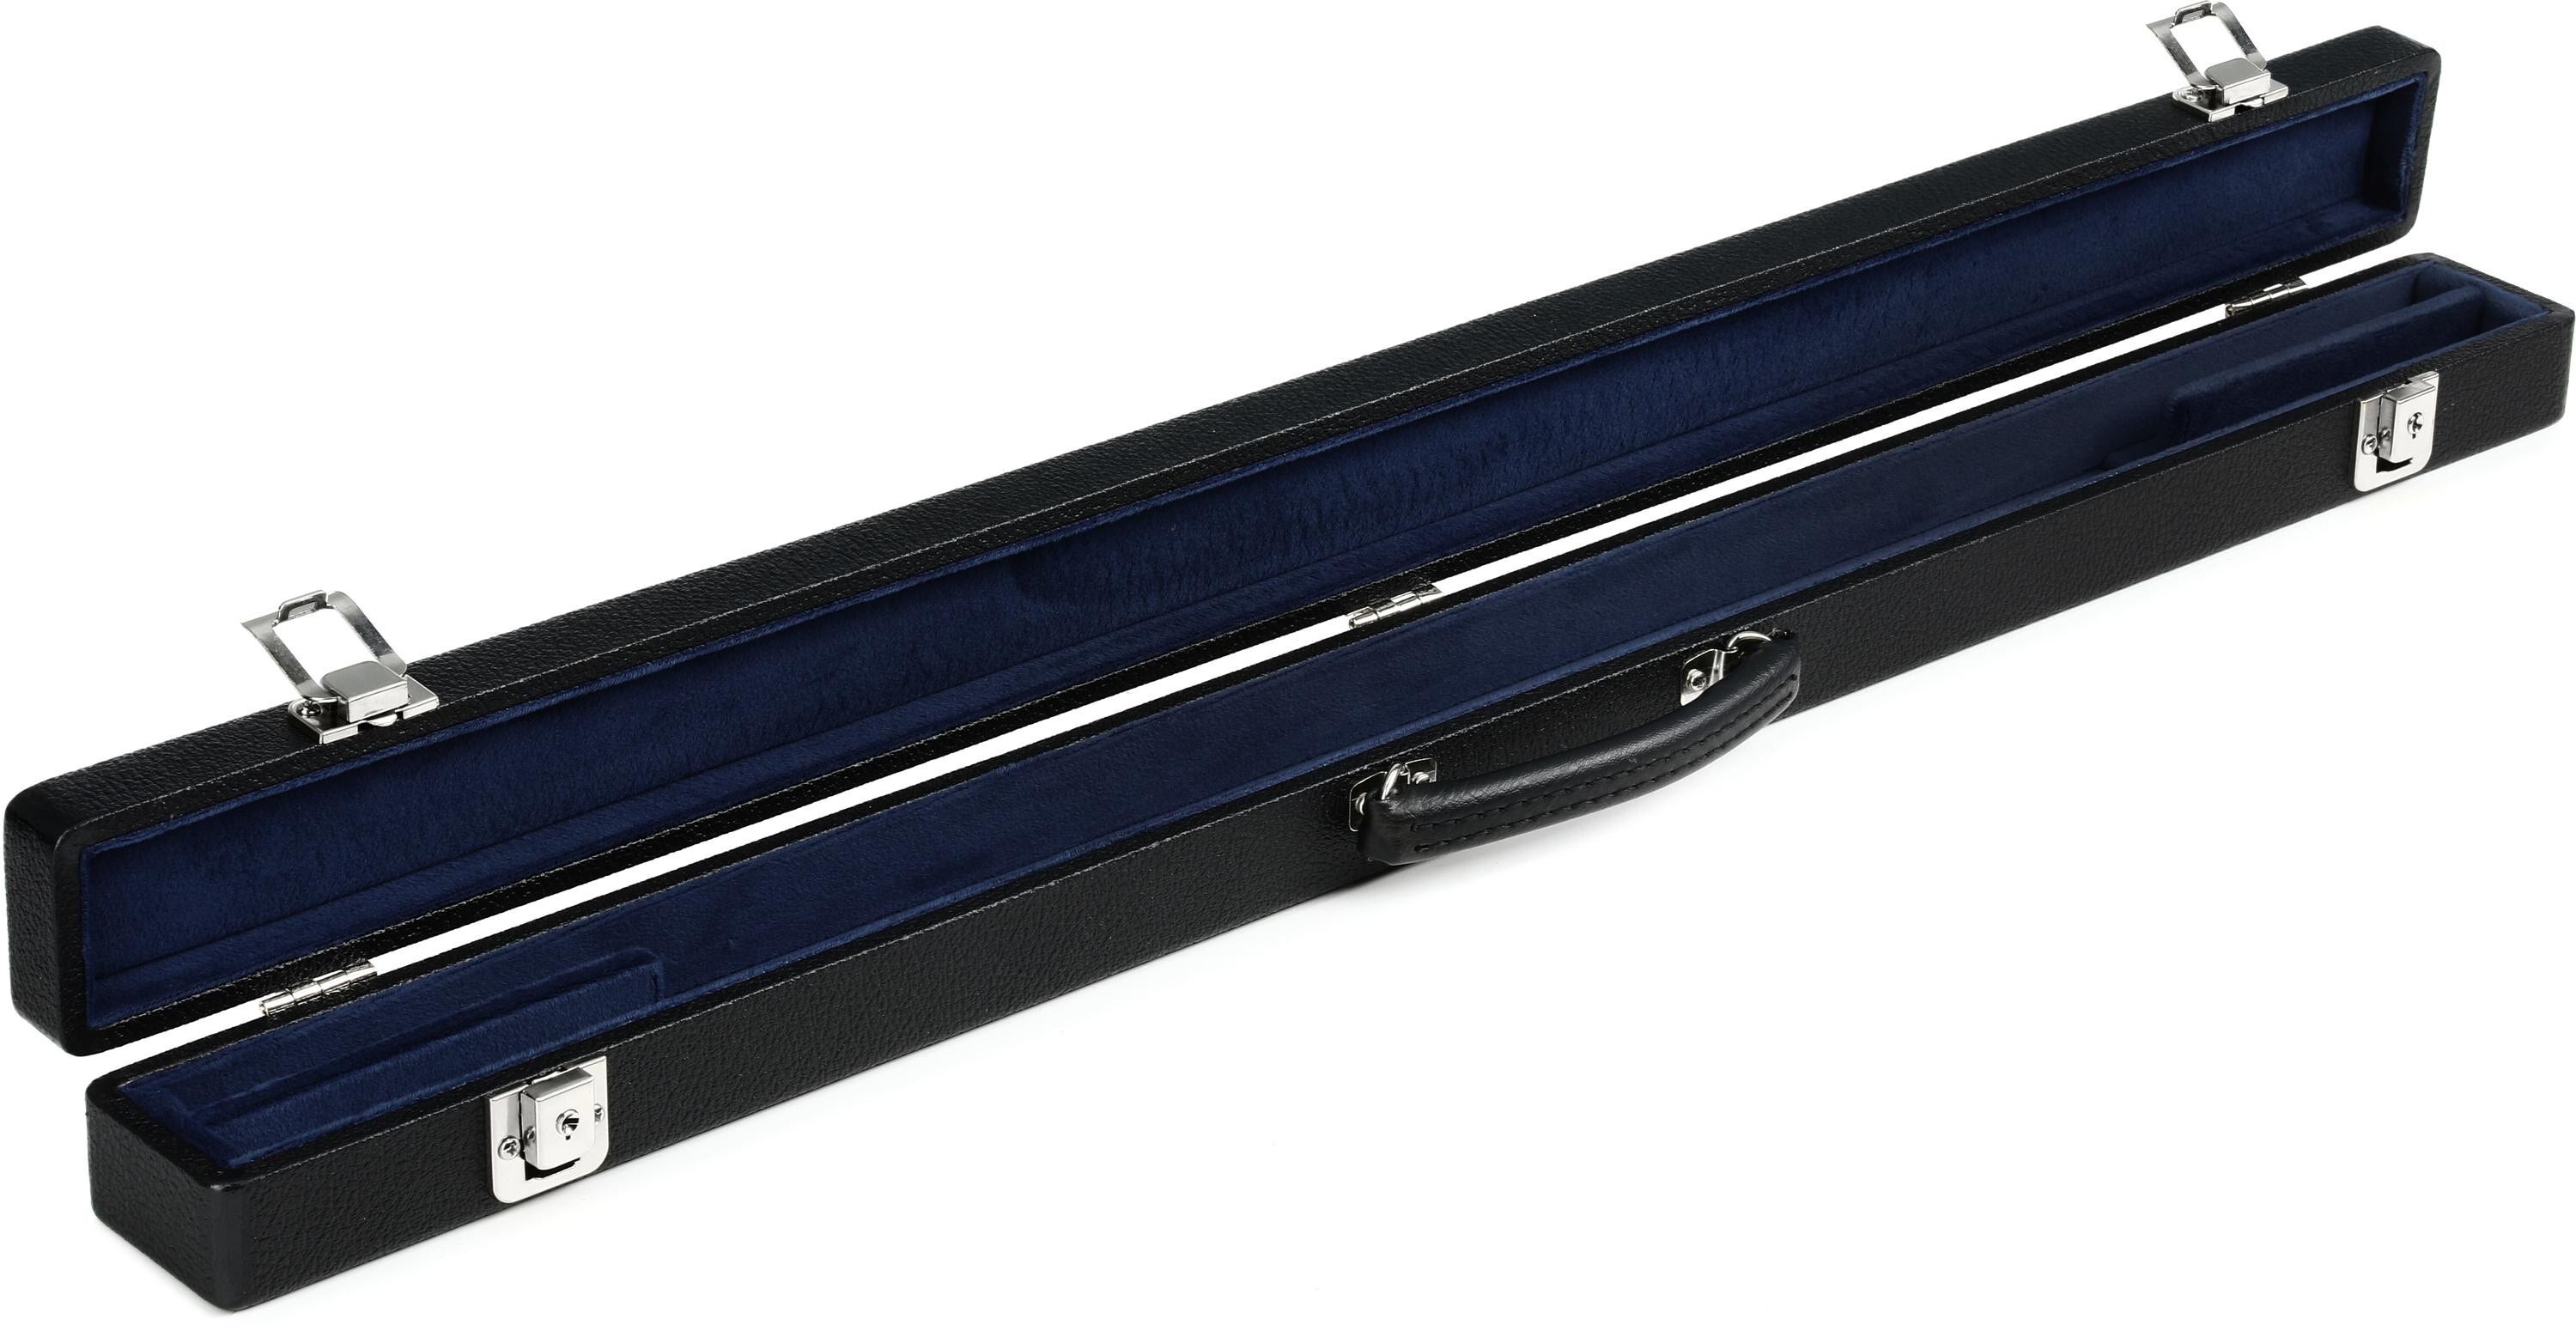 Bobelock B8-2BB Double Bow Case - Black with Blue Interior | Sweetwater